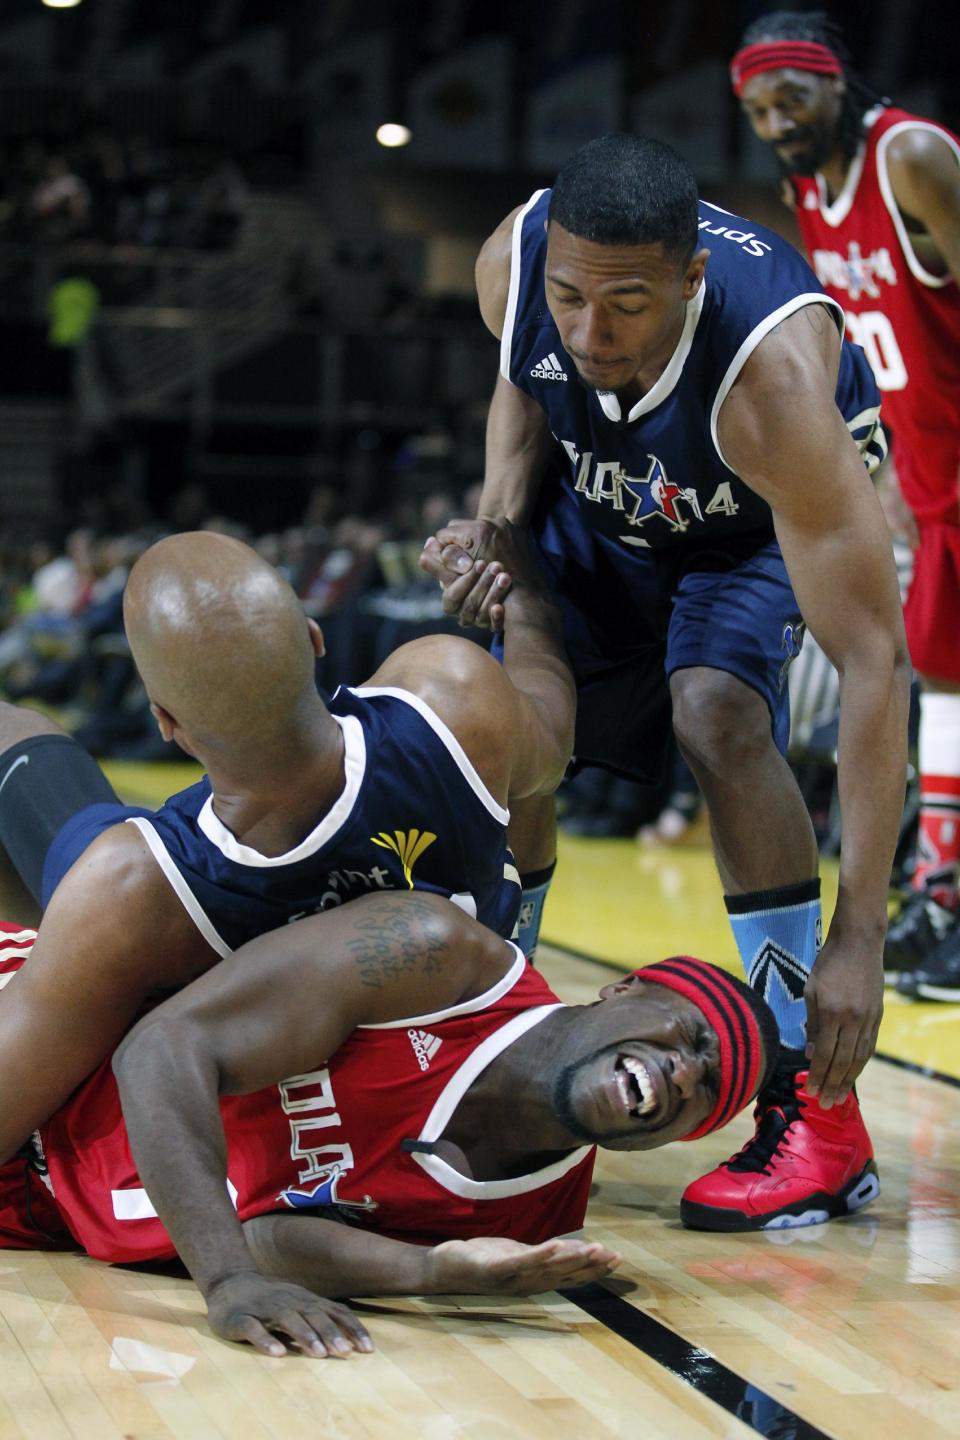 East's Nick Cannon, front left, reaches for West's Kevin Hart, bottom, as East's Bruce Bowen, top left, gets up in the first half as they participate in the NBA All-Star Celebrity basketball game in New Orleans, Friday, Feb. 14, 2014. East won 60-56. (AP Photo/Bill Haber)